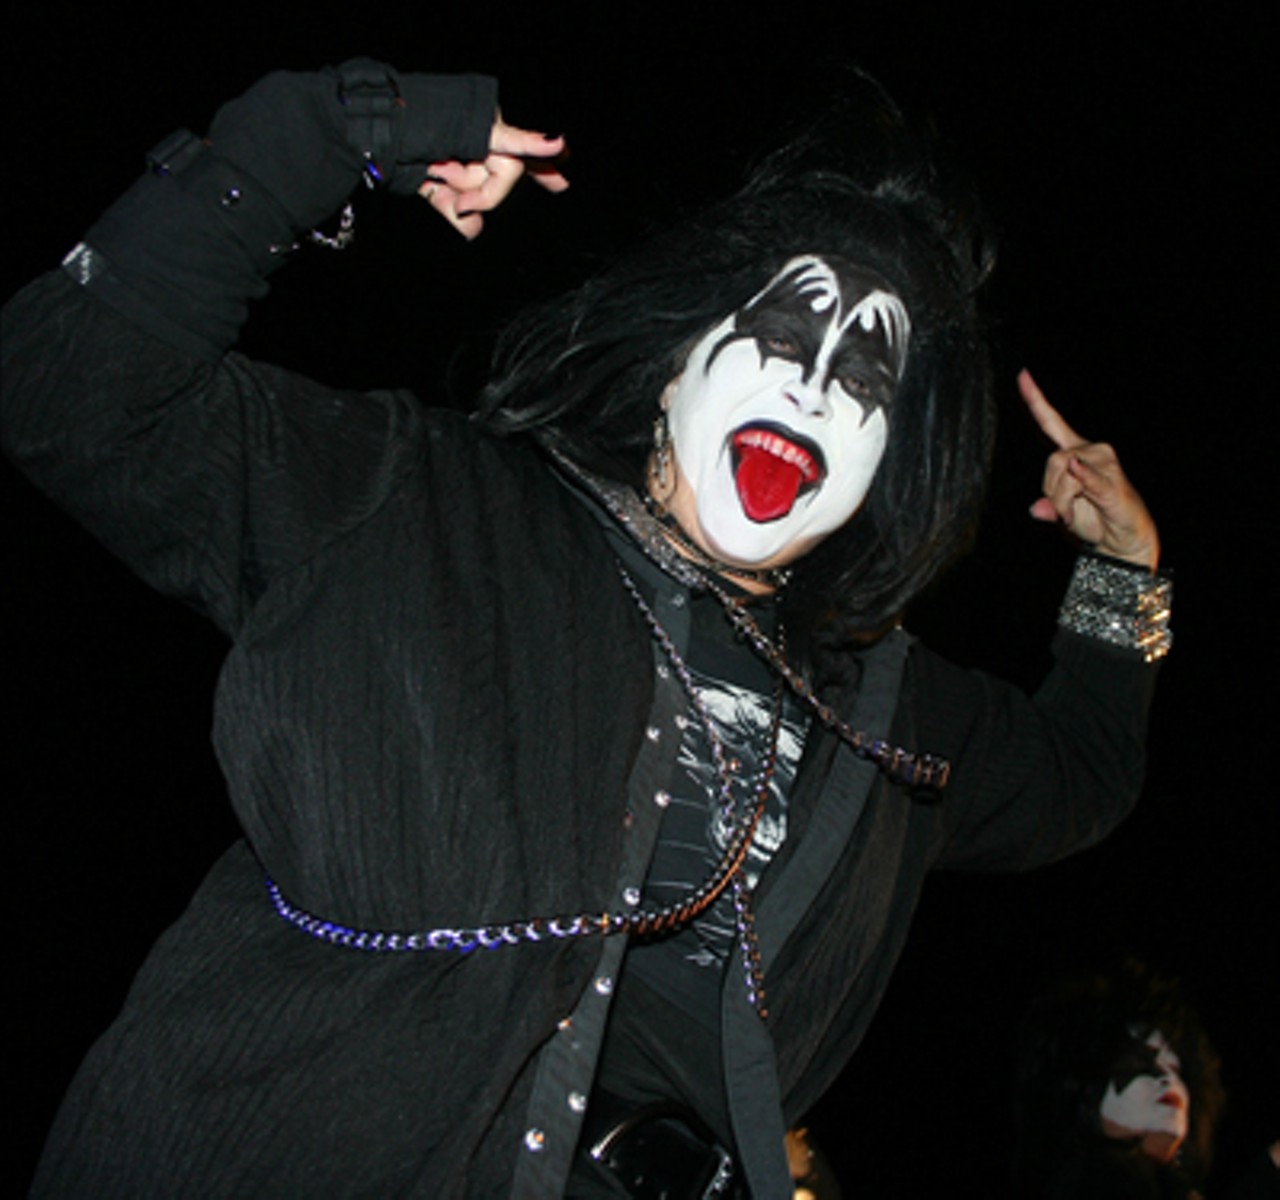 Gene Simmons and the rest of KISS were among the finalists.